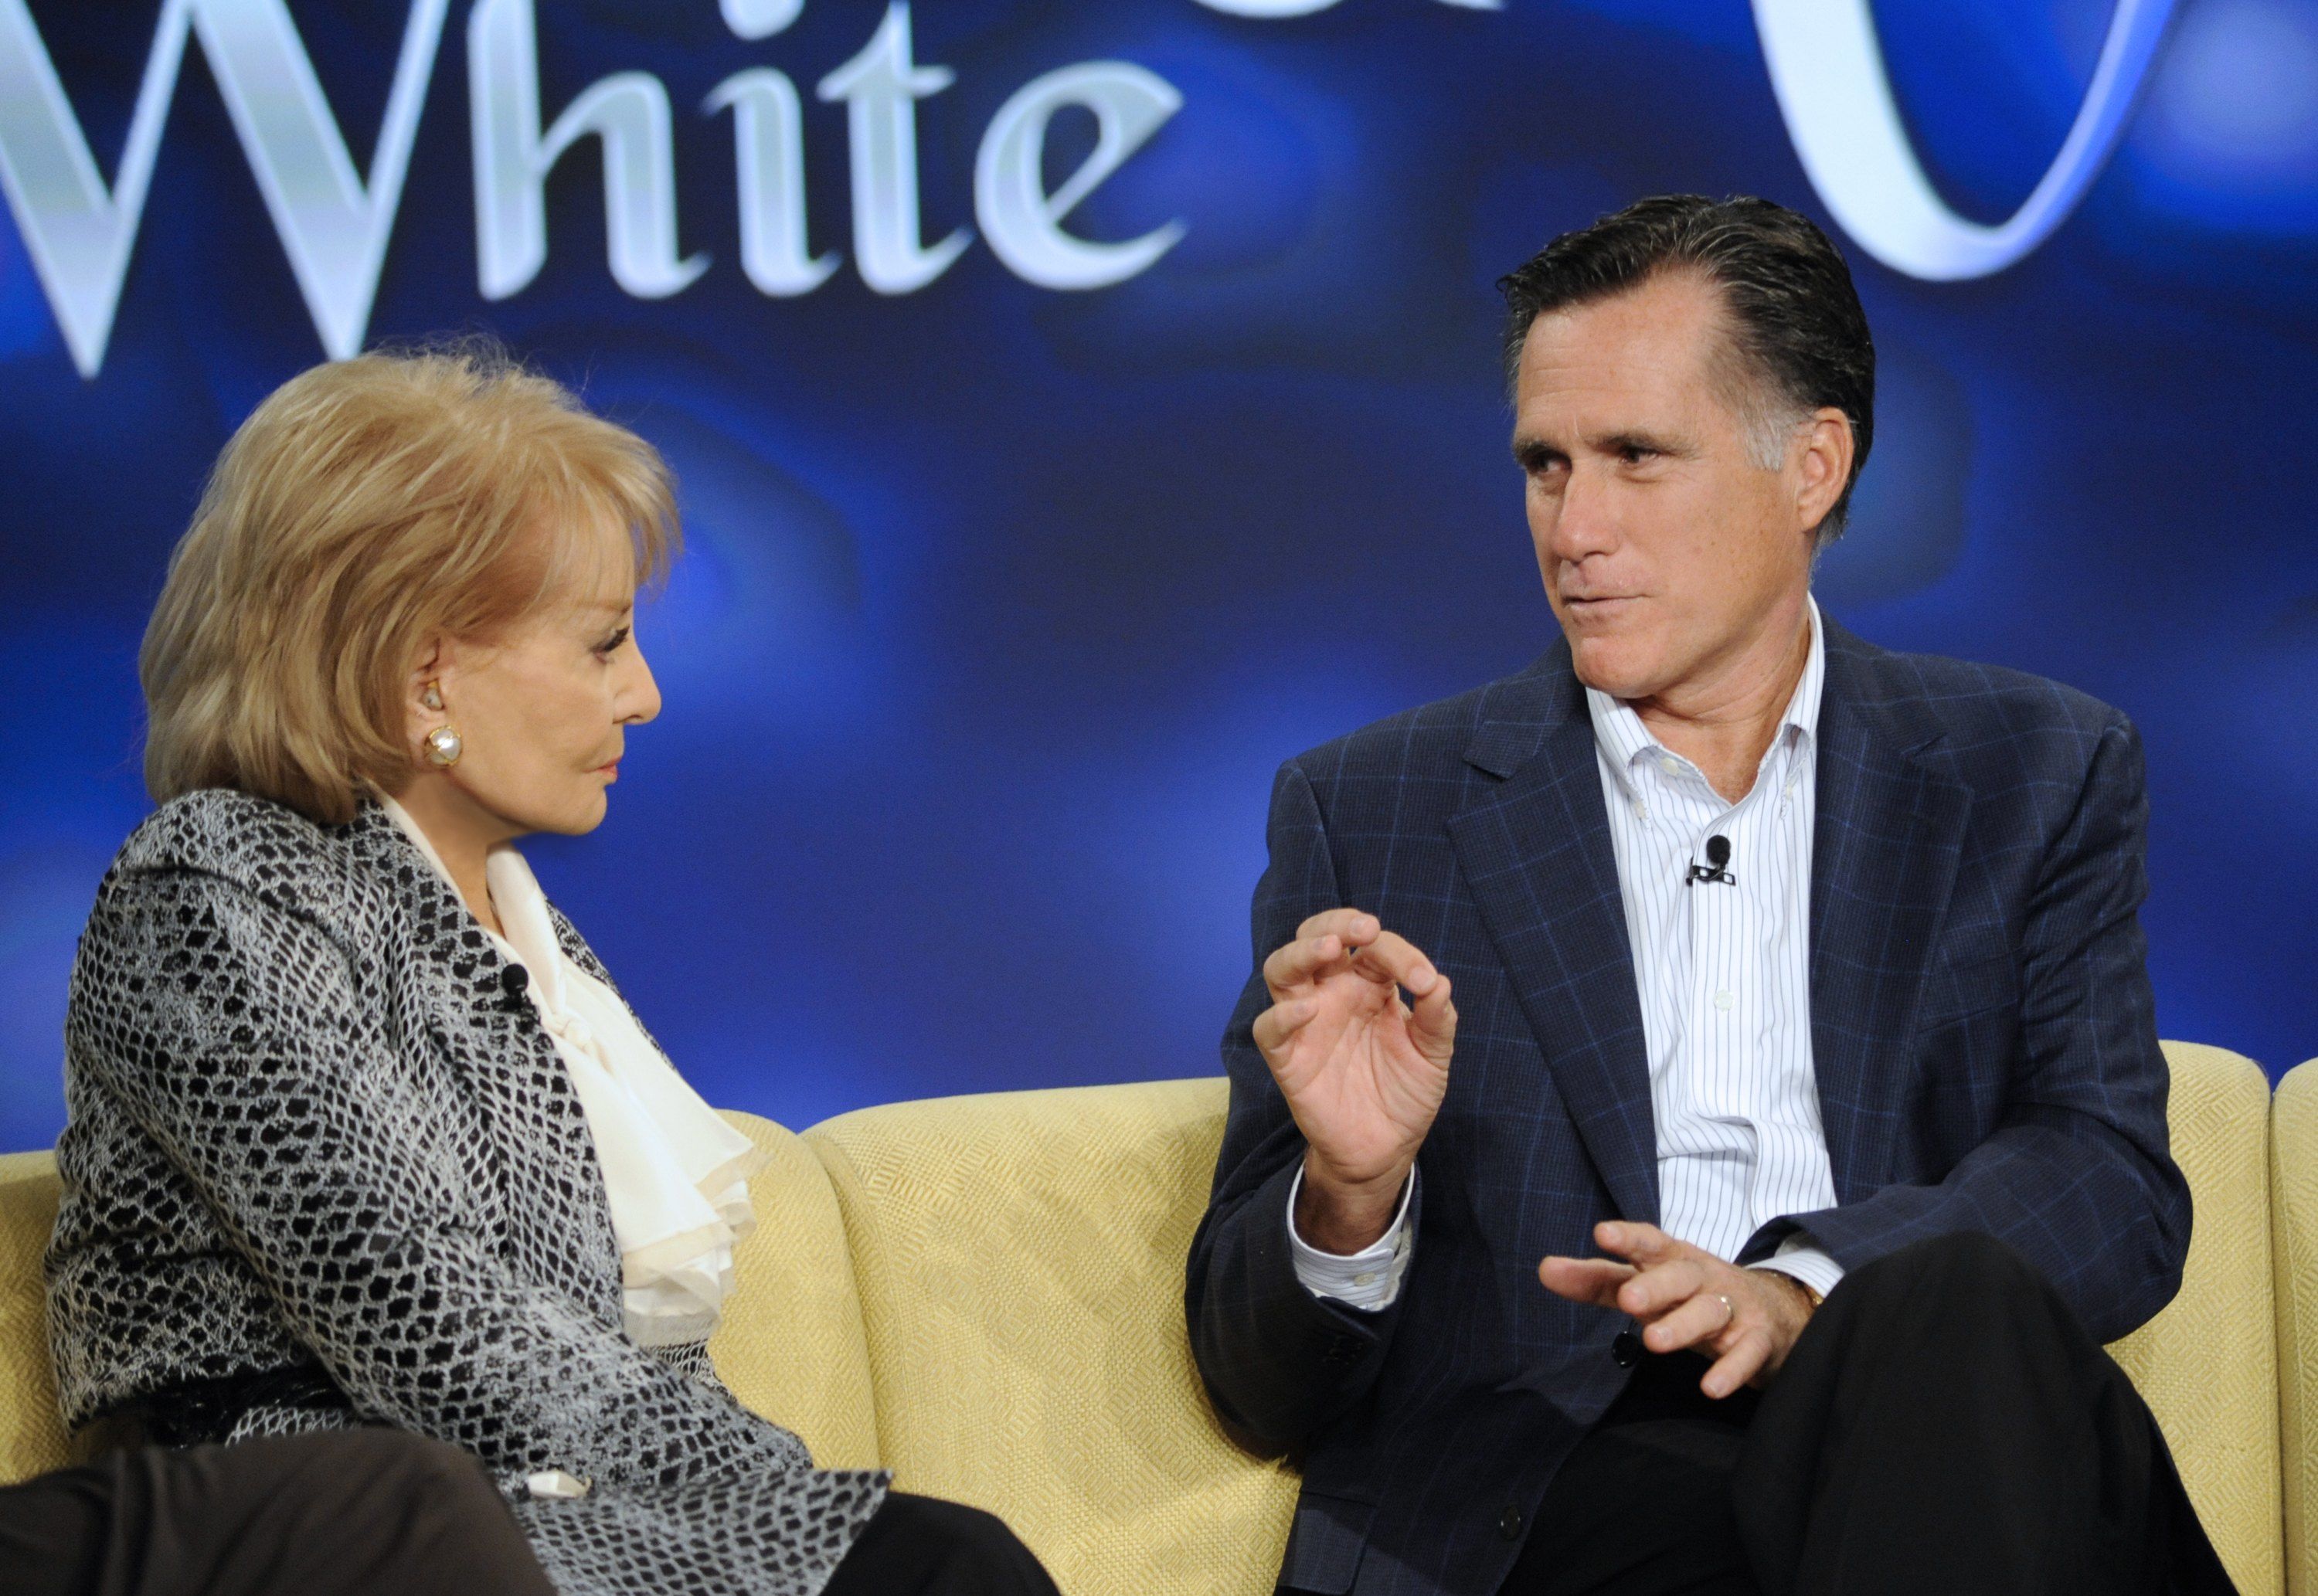 Former Massachusetts Governor Mitt Romney and his wife, Ann Romney appeared today on "The View."